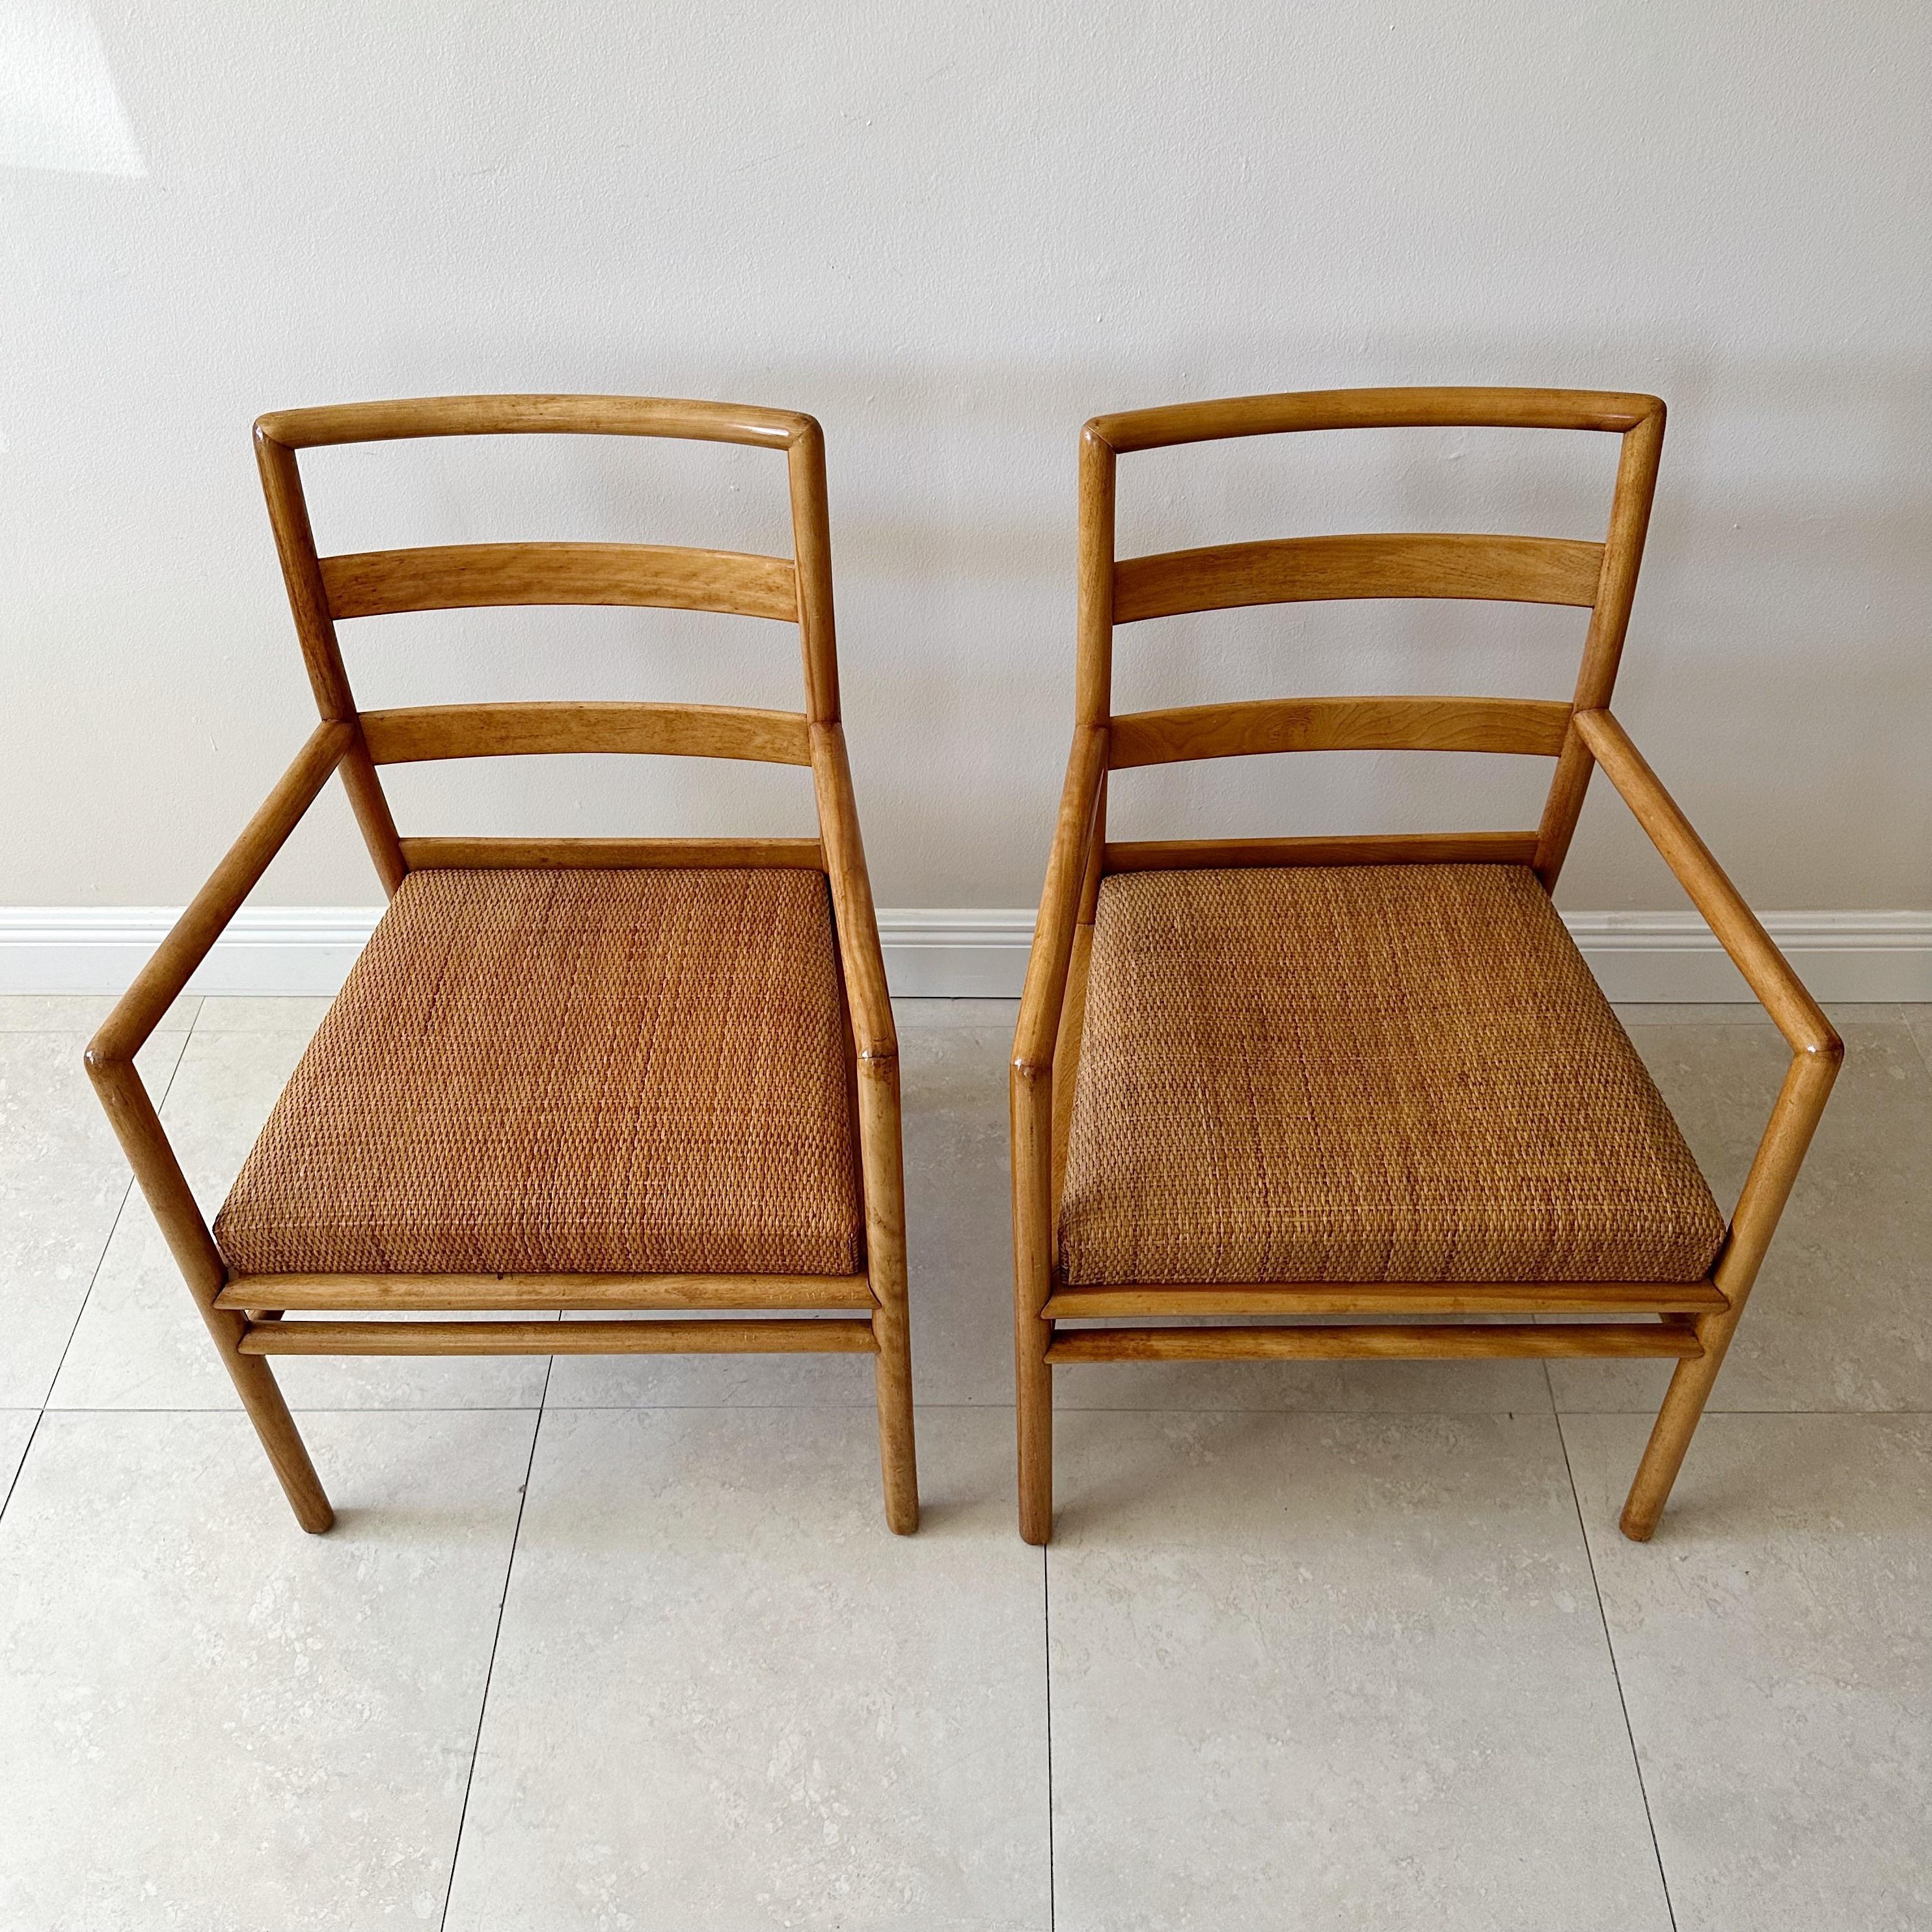 Pair of mid century armchairs by T. H. Robsjohn Gibbings for John Widdicomb. These chairs have light wooden frames, checkered rattan cane webbing seats, and ladder backs, resting on four dowel legs with stretchers.